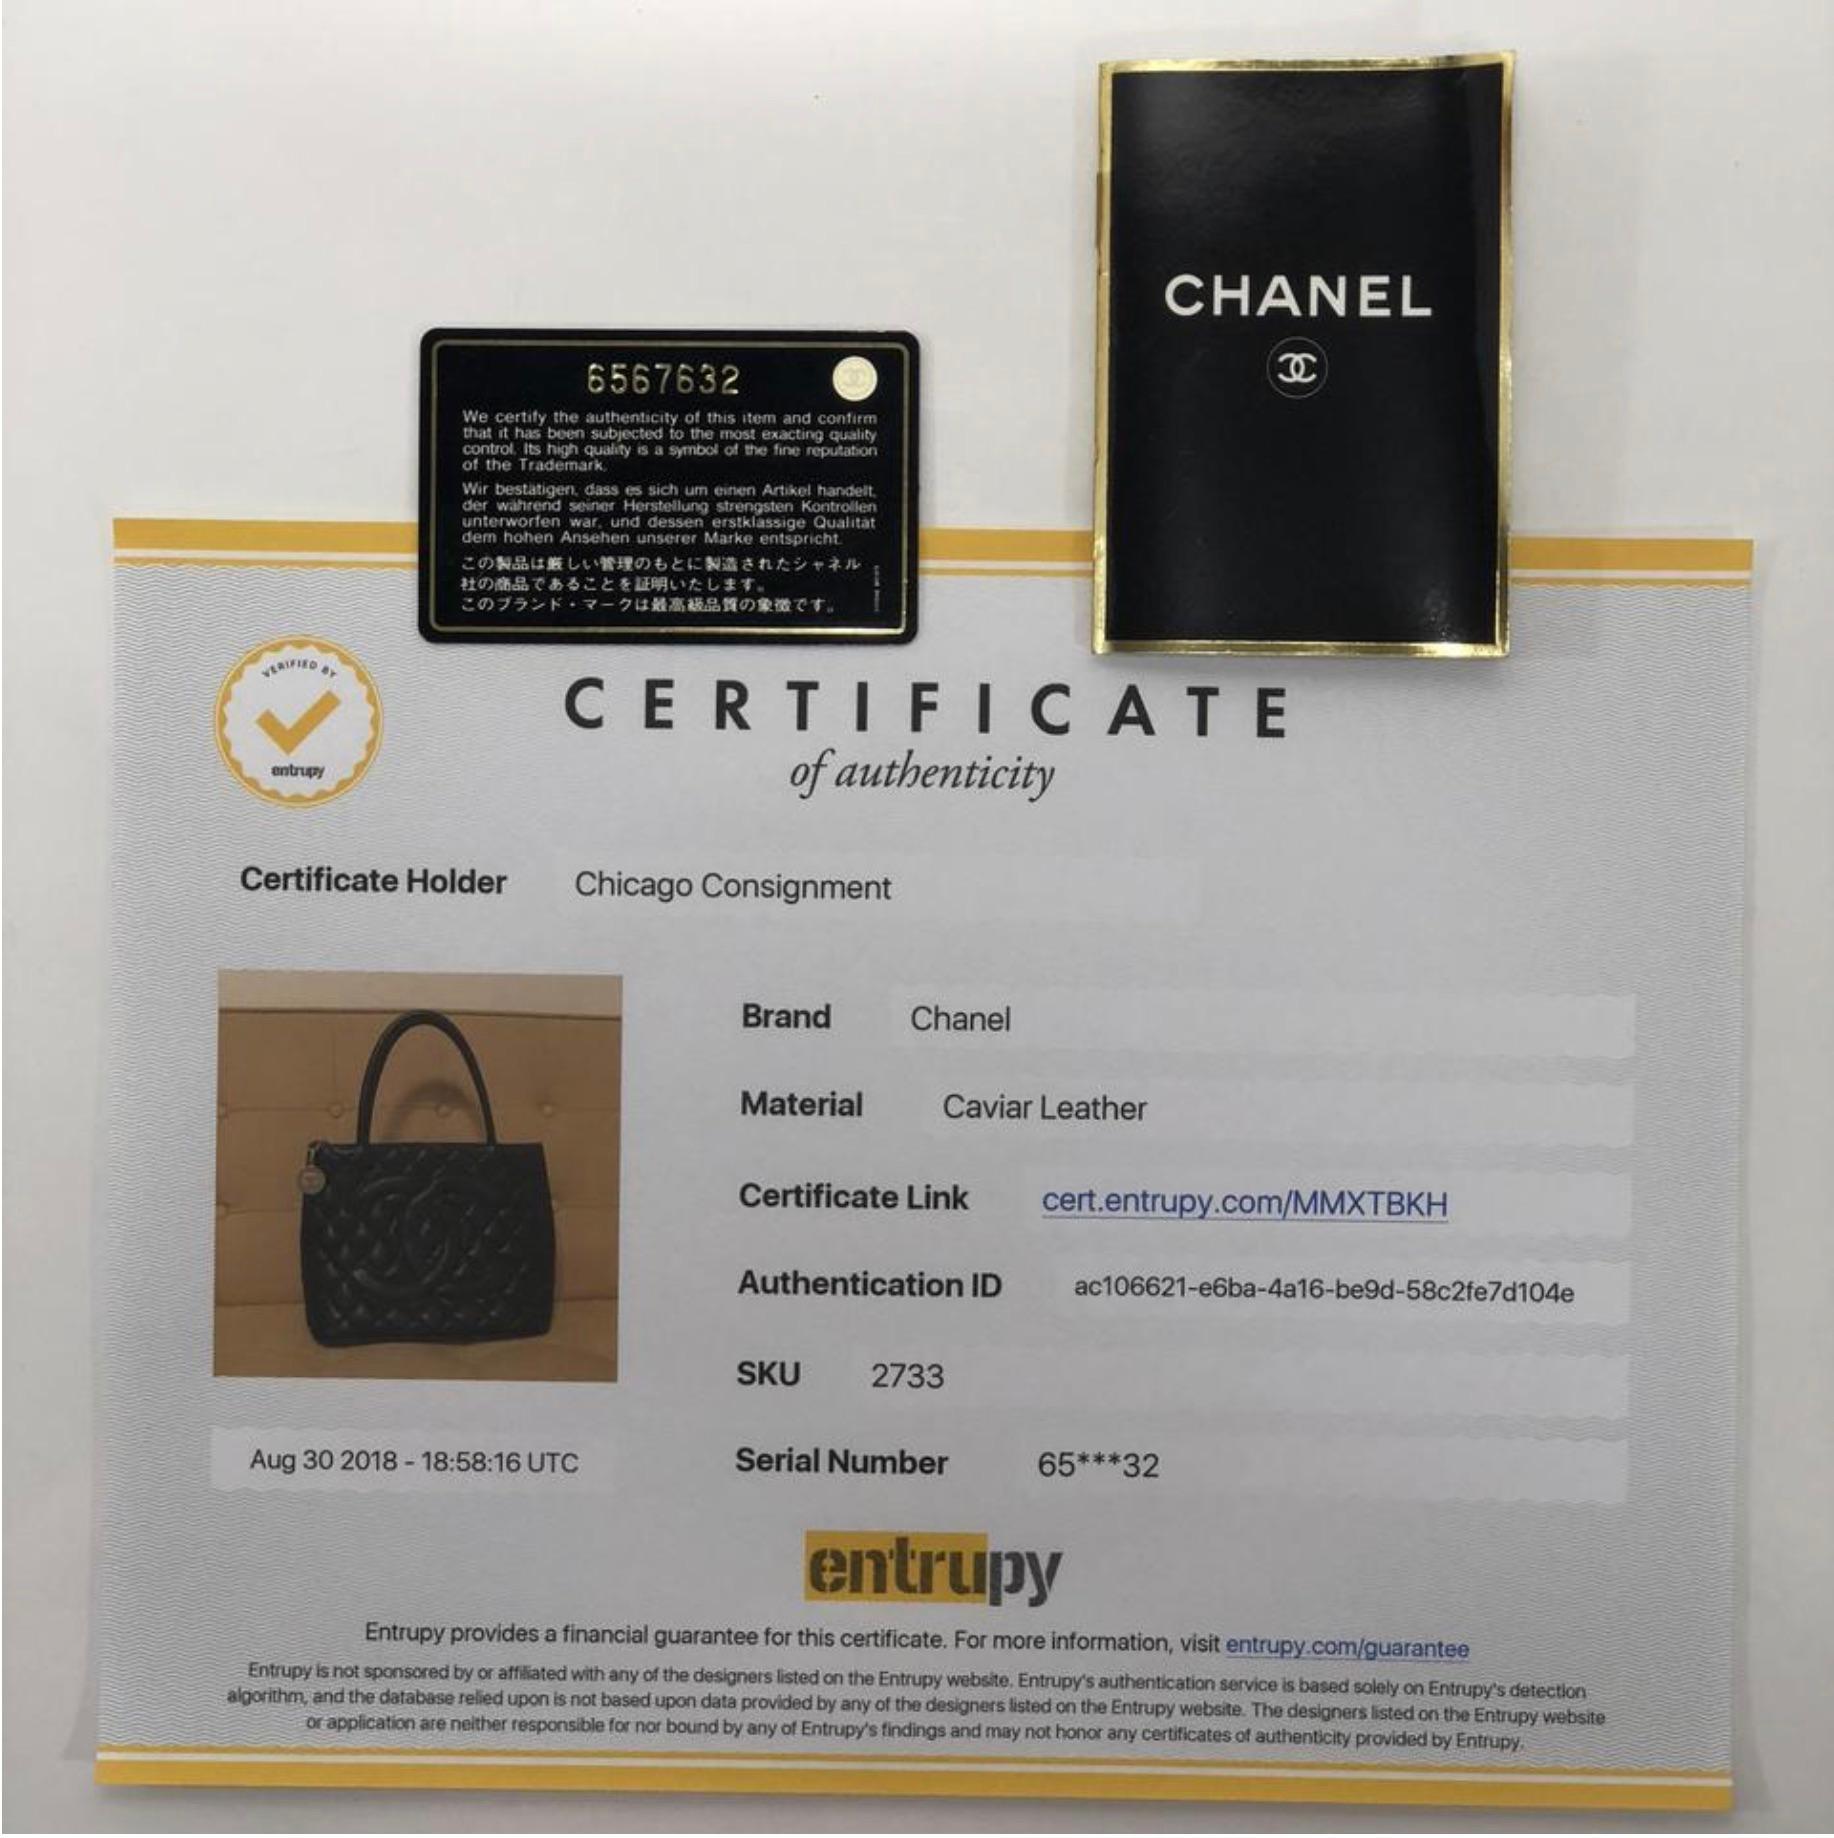 MODEL - Chanel Caviar Leather Medallion with Silver Hardware in Black Shoulder Handbag

CONDITION - Exceptional! No visibile signs of wear.

SKU - 2733

ORIGINAL/CURRENT RETAIL PRICE - 2900 + tax

DATE/SERIAL CODE - 6567632

ORIGIN -